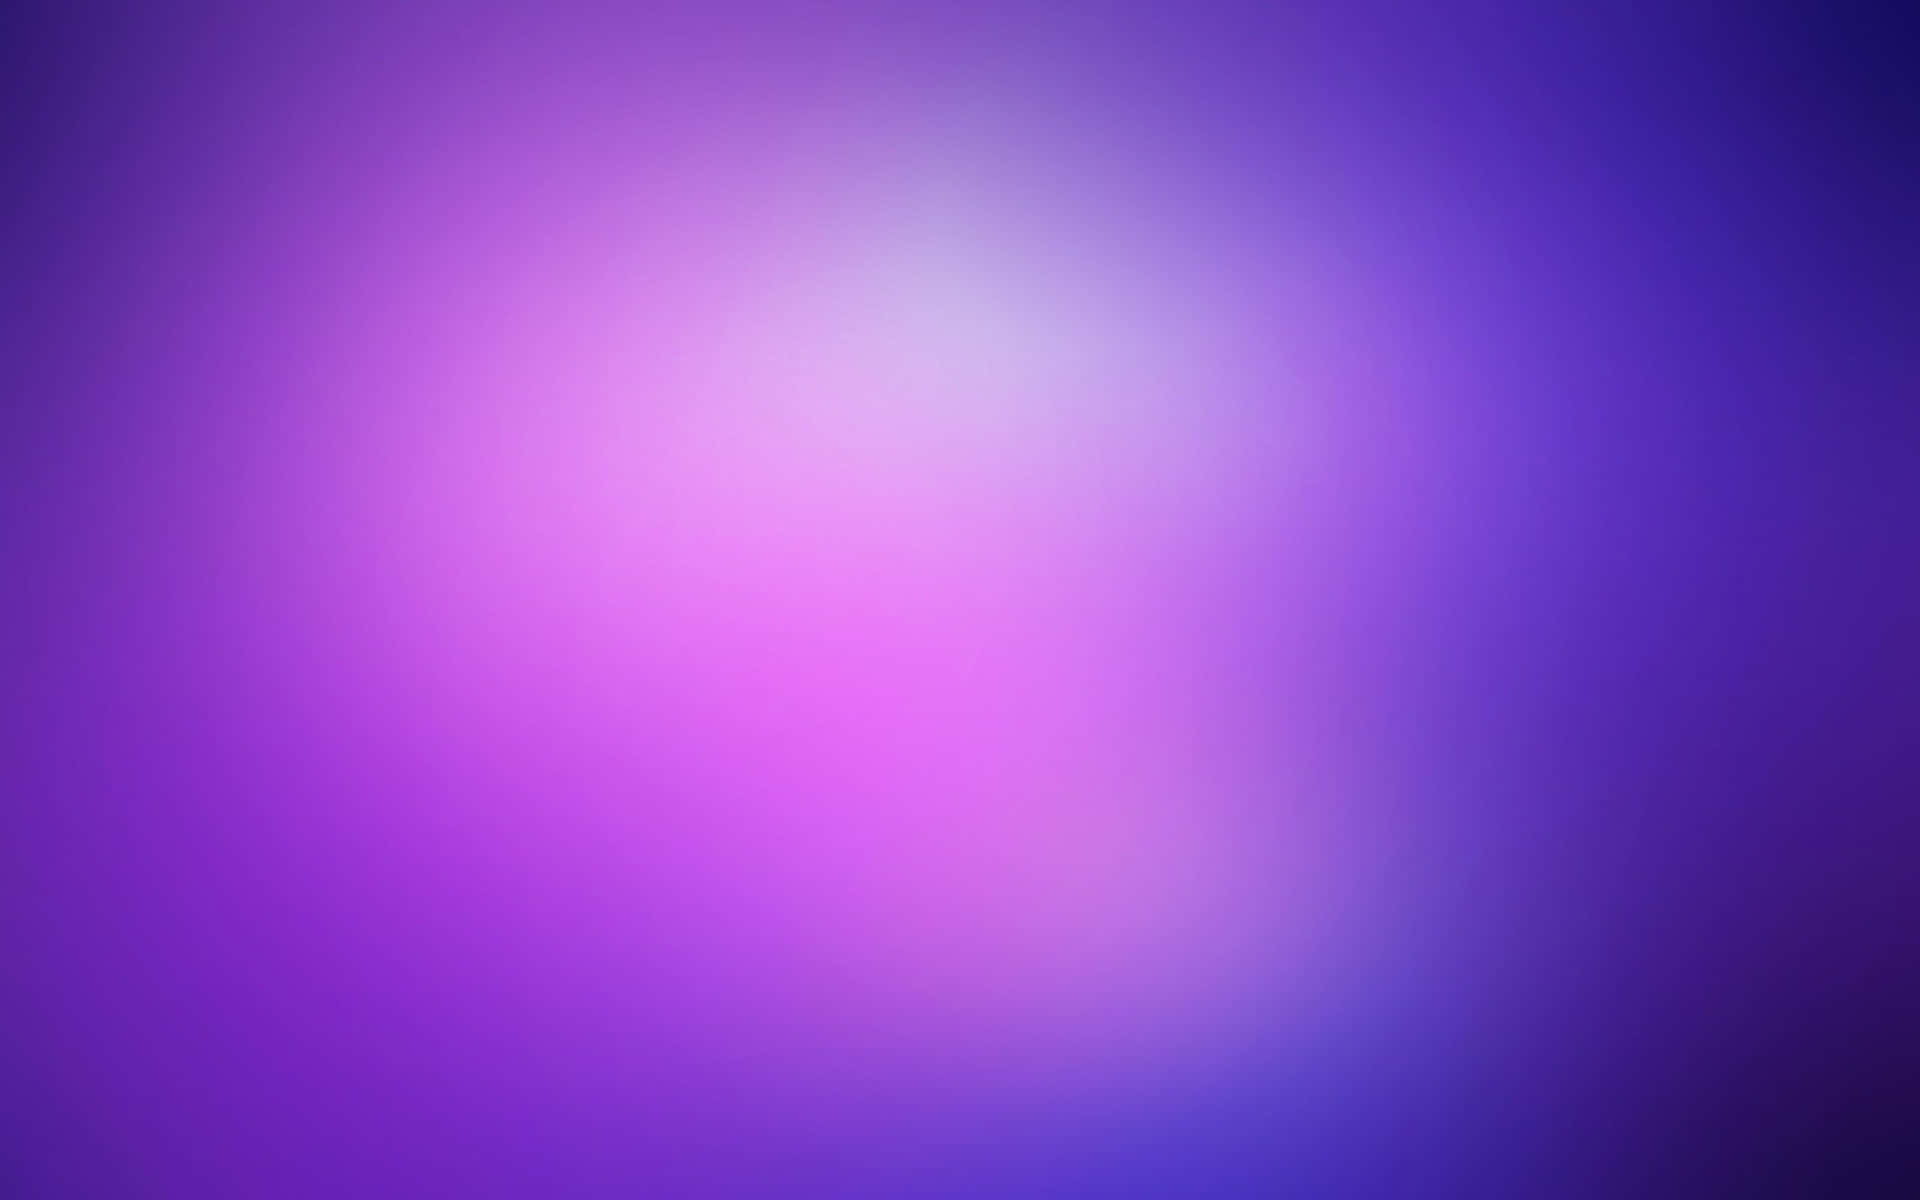 purple and blue blurred background